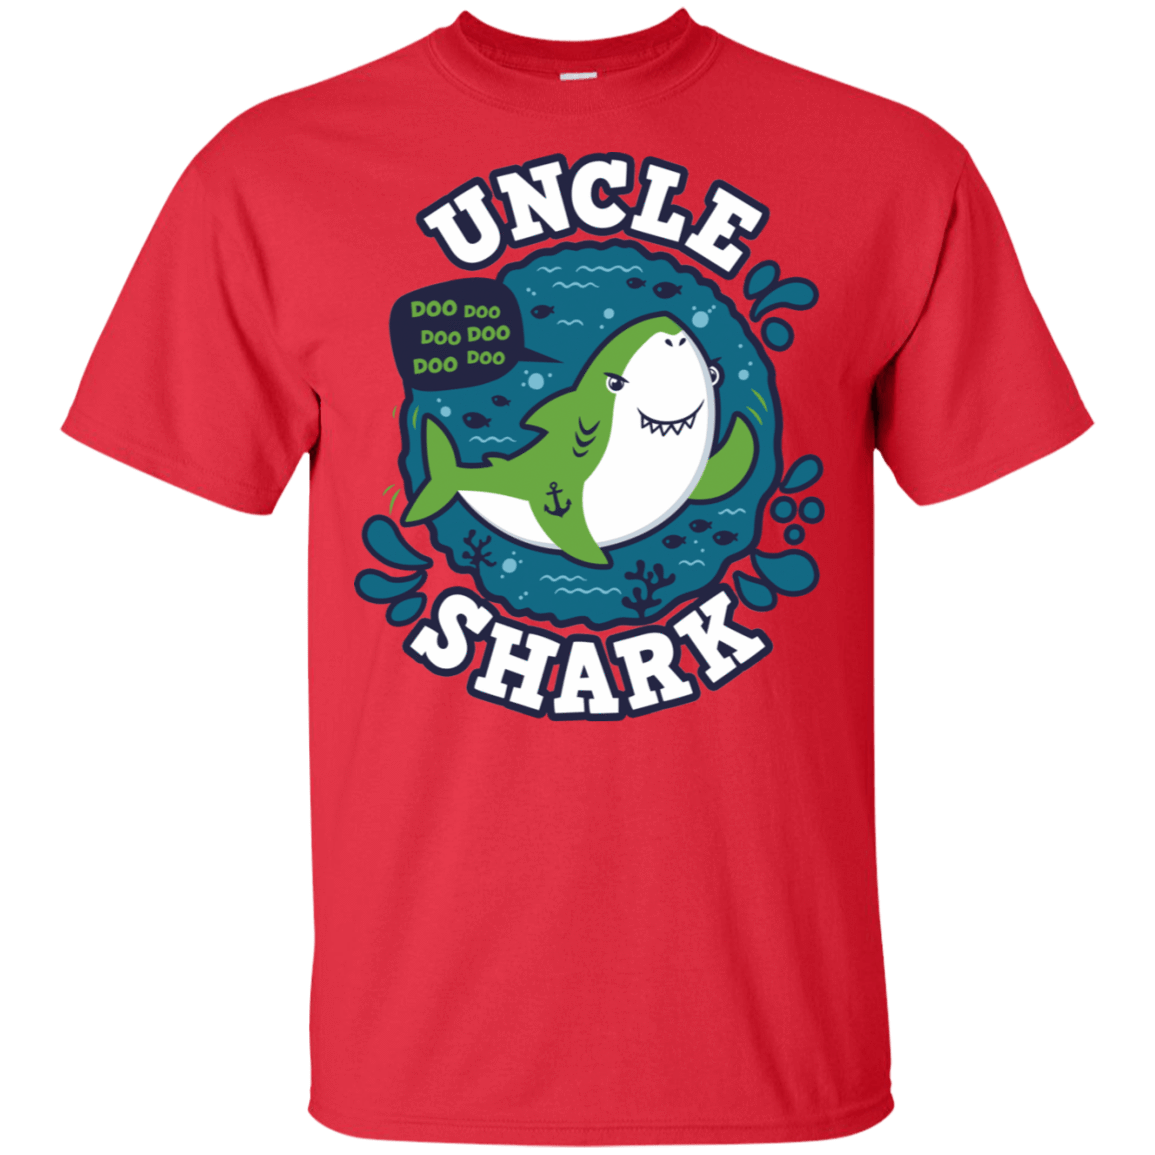 T-Shirts Red / S Shark Family trazo - Uncle T-Shirt